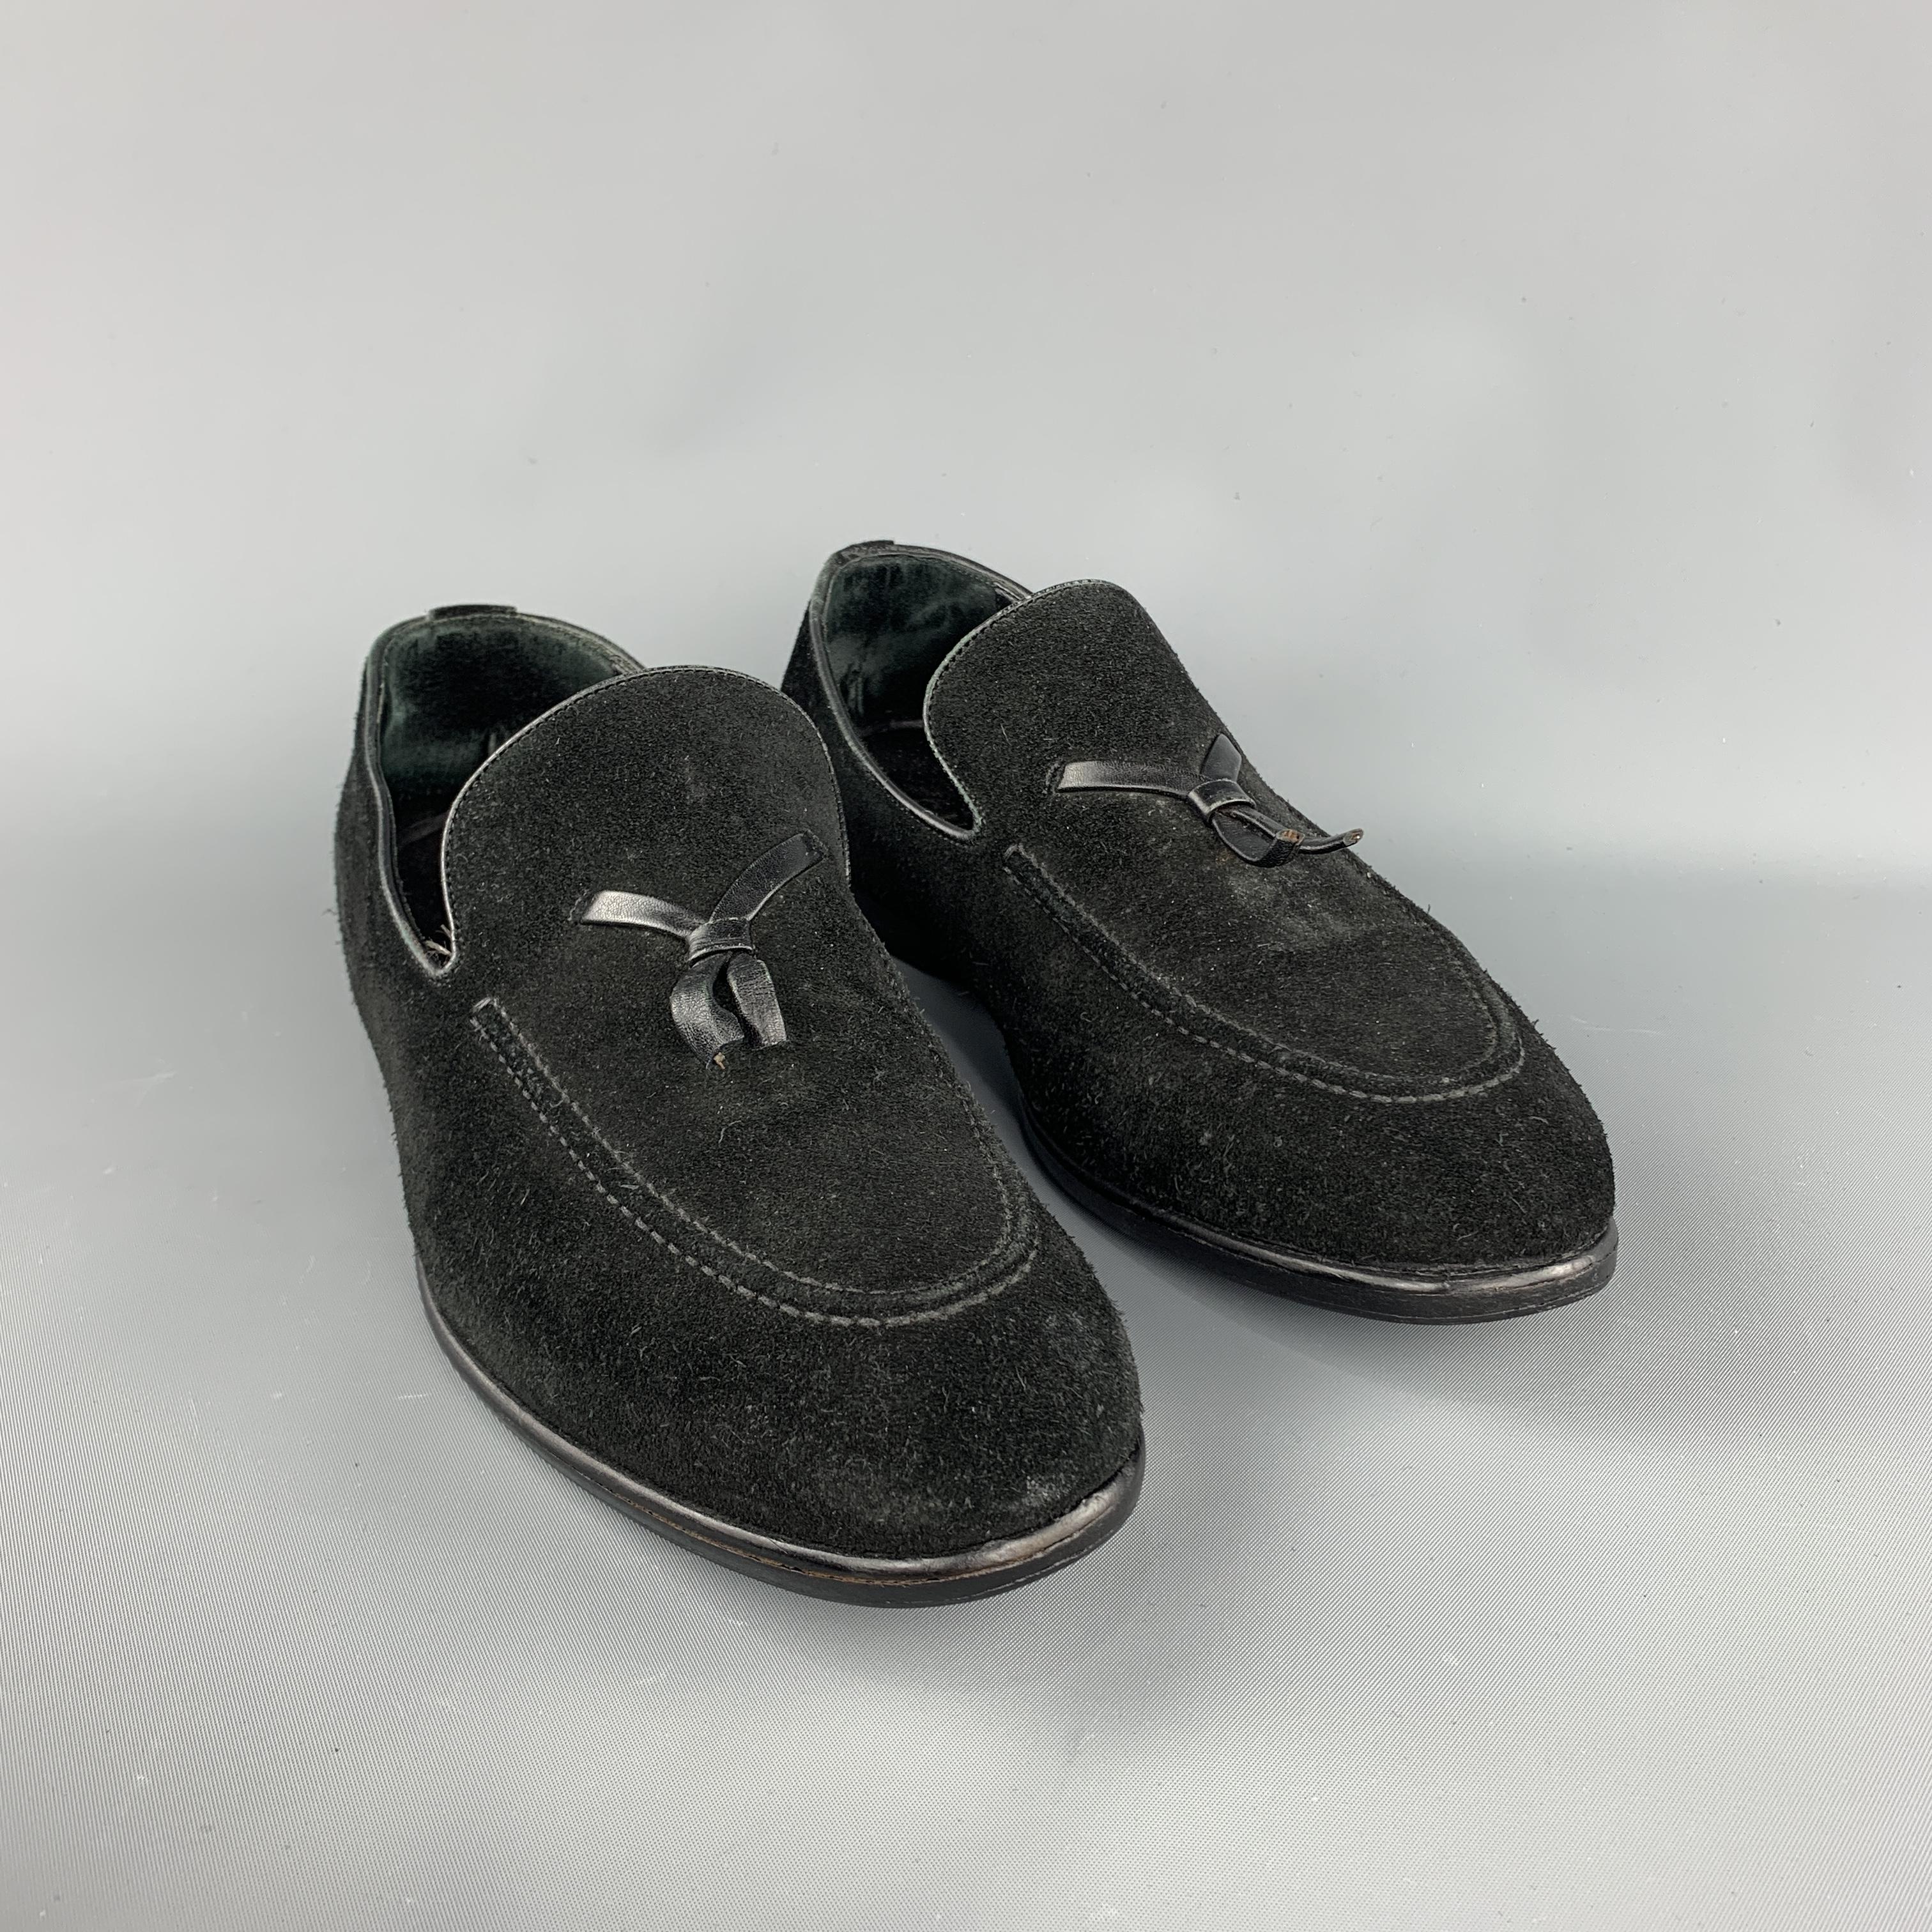 GUCCI loafer comes in a black suede featuring a slip on style, leather detail, and a wooden sole. Made in Italy.
 
Very Good Pre-Owned Condition.
Marked: 41
 
Measurements:
 
Outsole: 12 in. x 4 in.